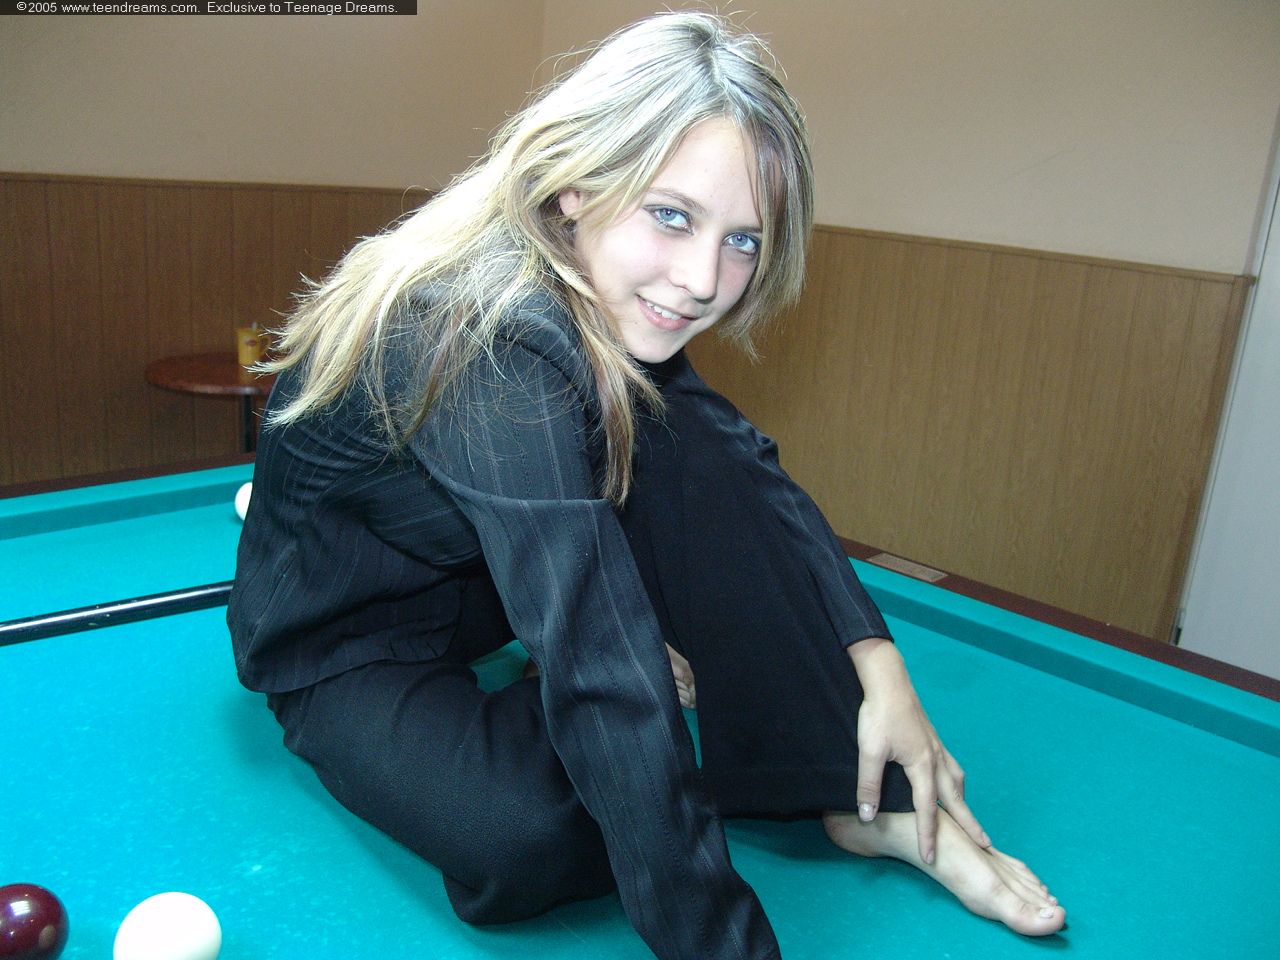 liza-gets-naked-on-the-pool-table-1